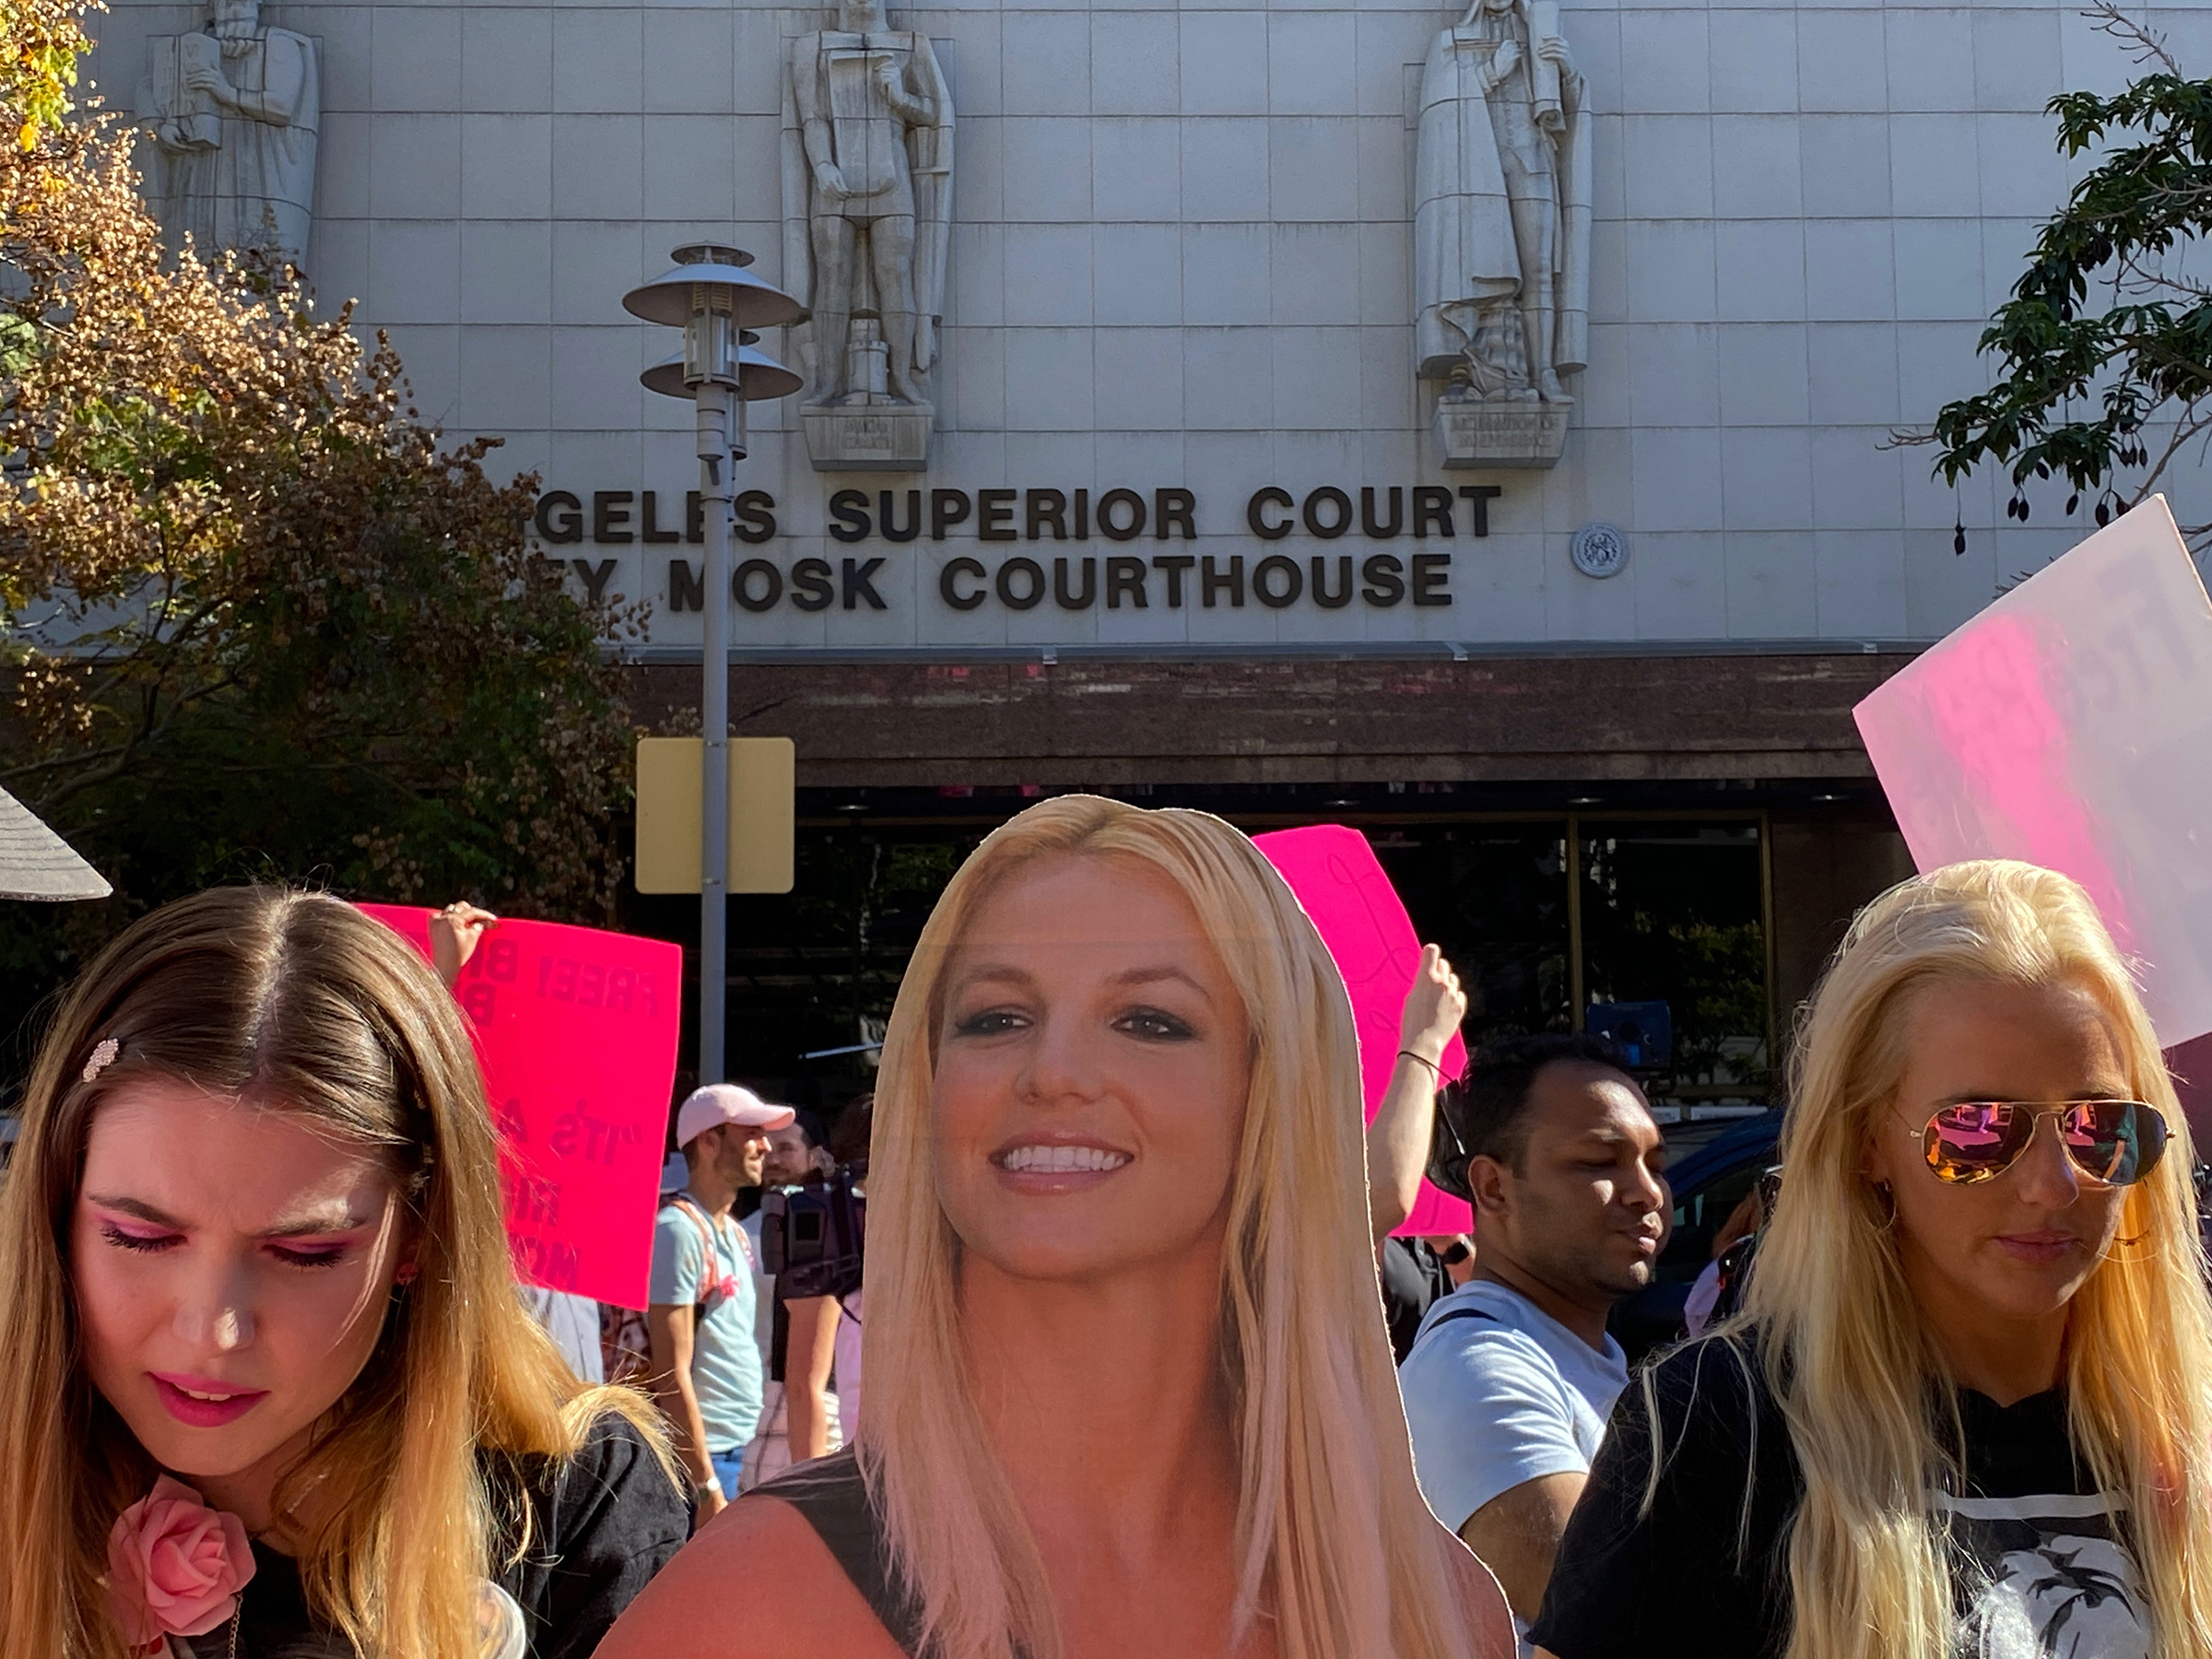 Supporters of Britney Spears gather outside an L.A. courthouse on Nov. 12 where a judge that day ended the conservatorship that denied her control of her health and finances for 13 years. (Chloe Pang—The New York Times/Redux)